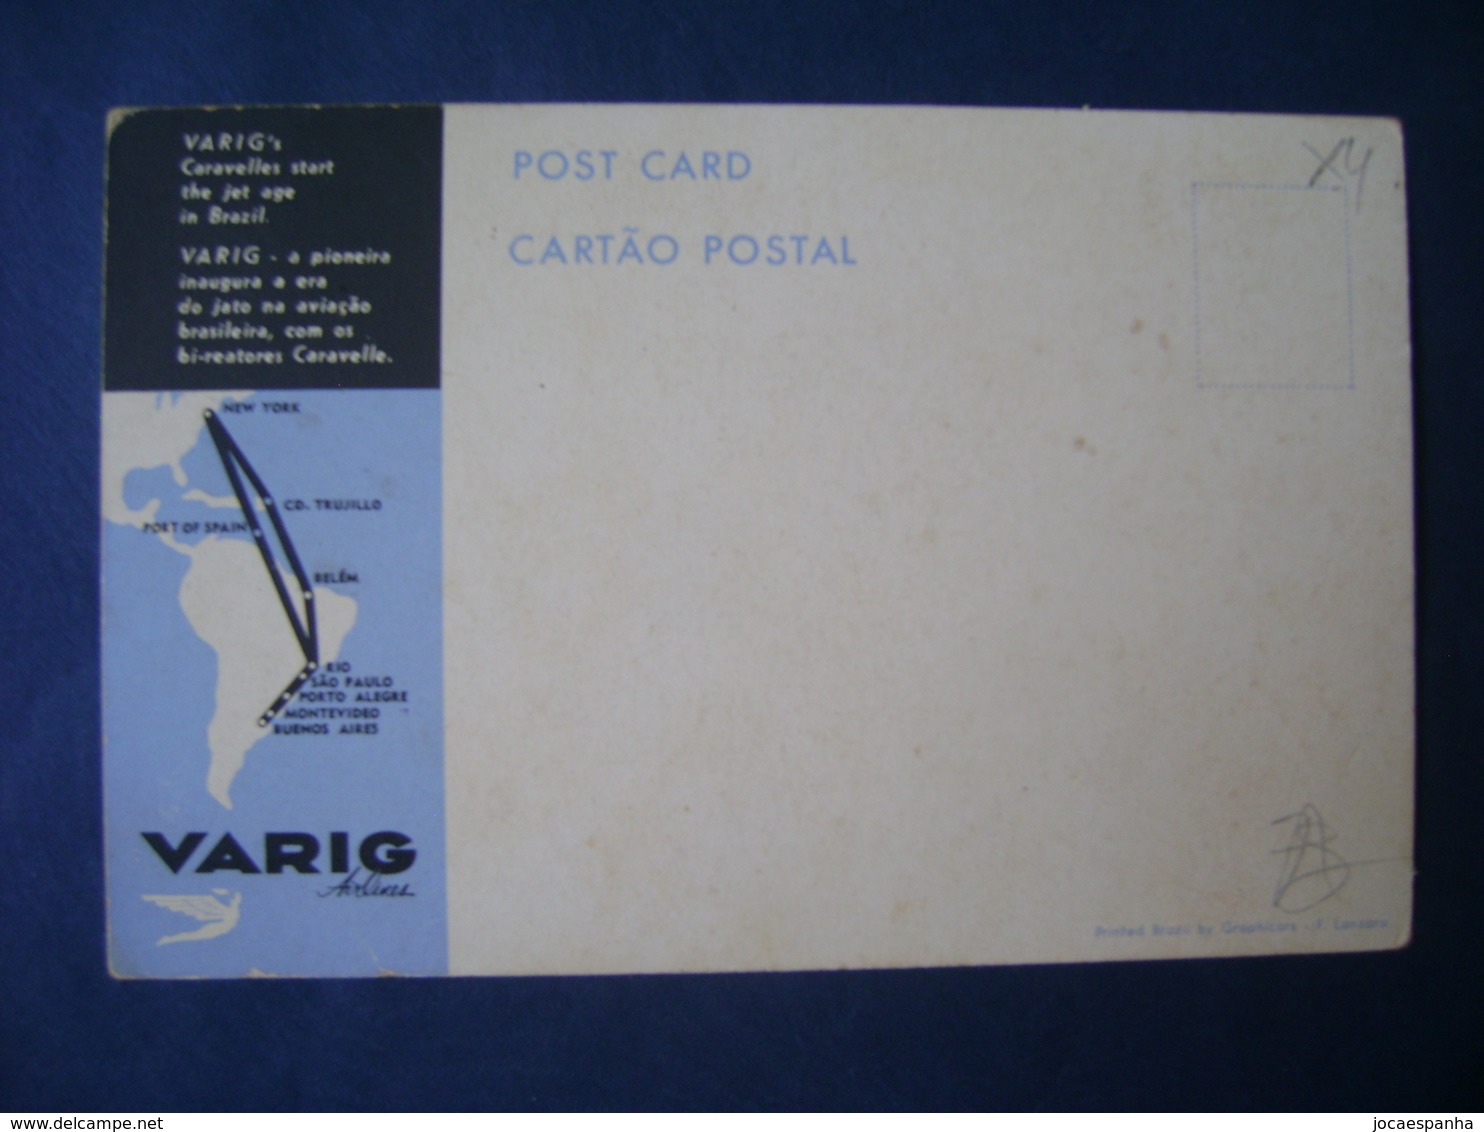 VARIG (BRAZIL) - OFFICIAL POST CARD OF AIR PLANE CARAVELLE IN THE STATE - Dirigeables